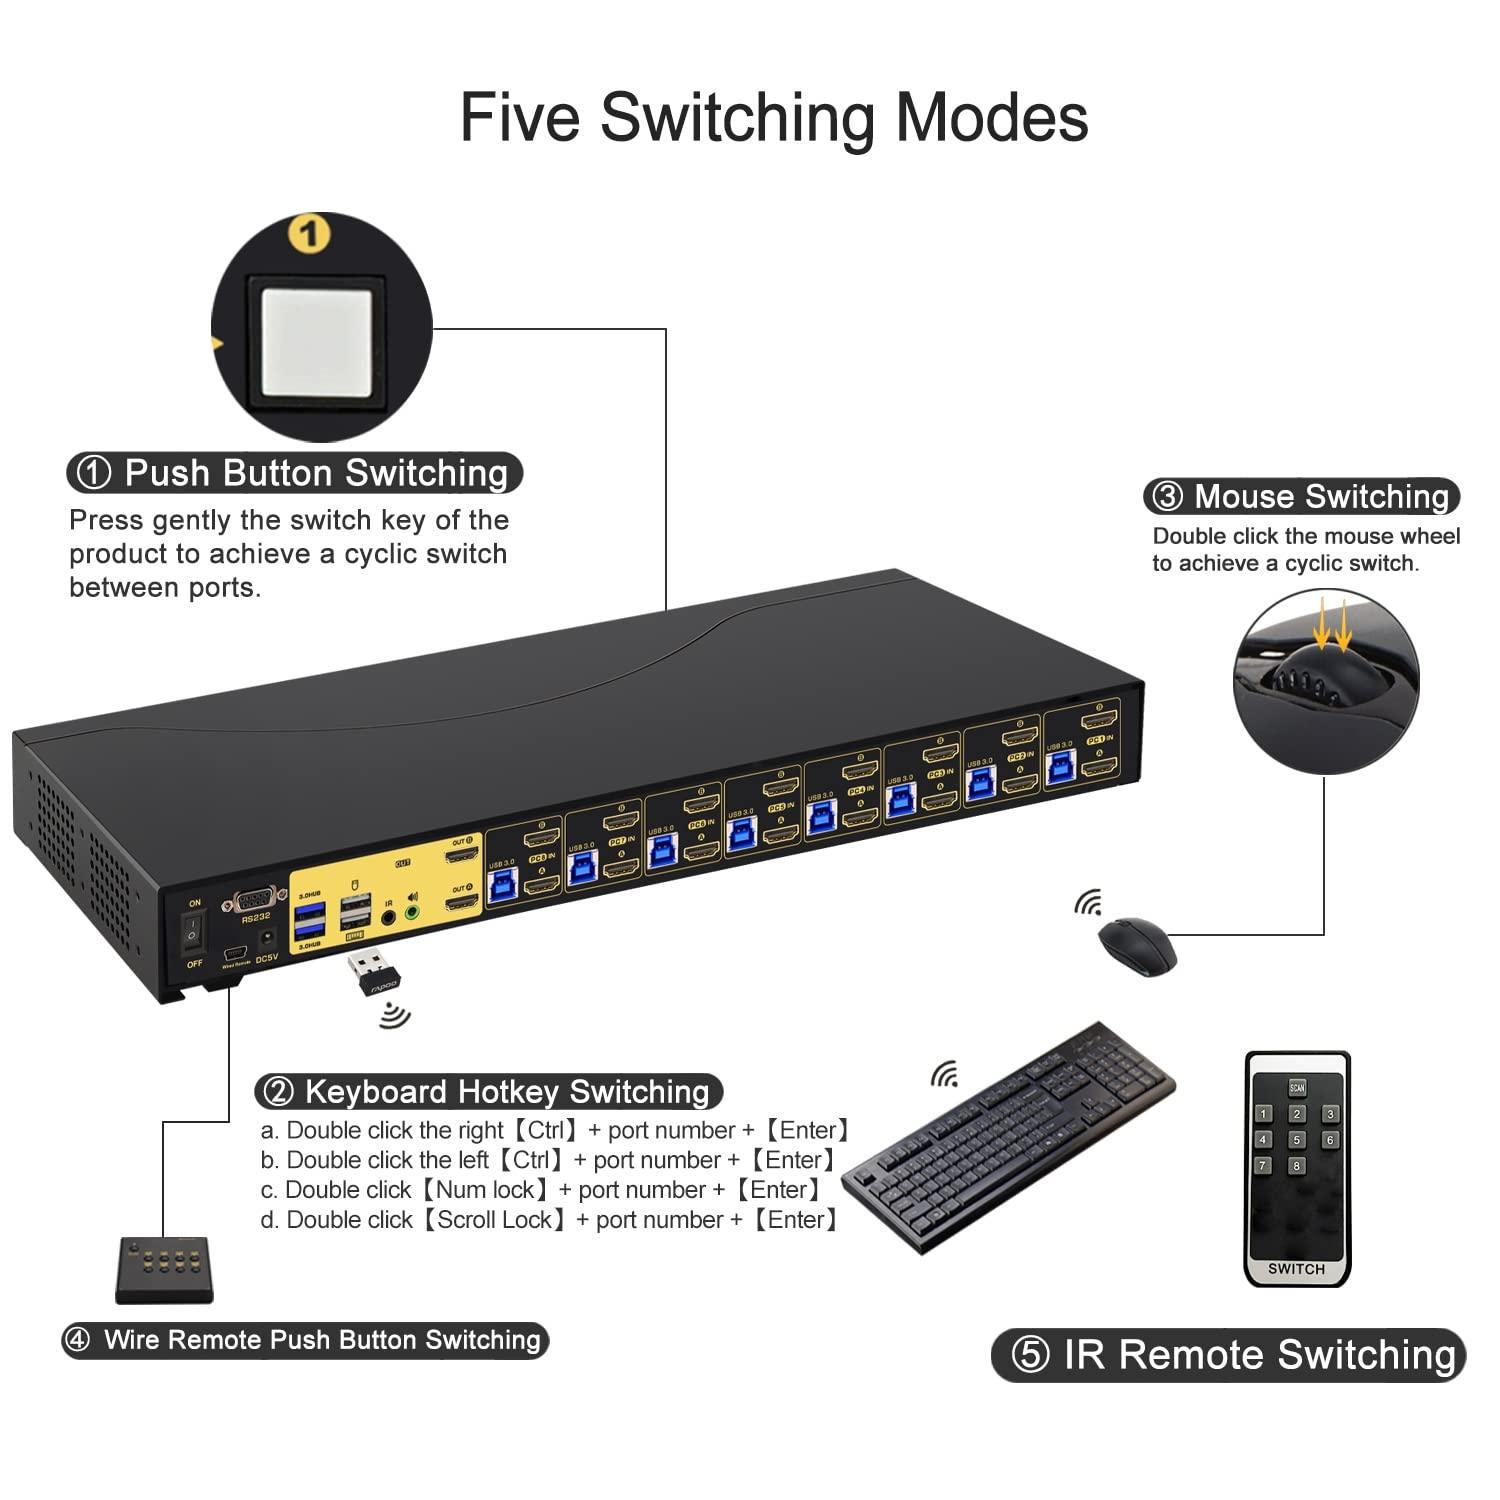 CKL 8 Port USB 3.0 Rack Mount HDMI KVM Switch Dual Monitor 4K@60Hz with Audio, 2 Integrated USB 3.0 Hub and Cables, Keyboard Mouse Hotkey Switcher Box Supports IR Remote （CKL-9238H-3) - CKL KVM Switches